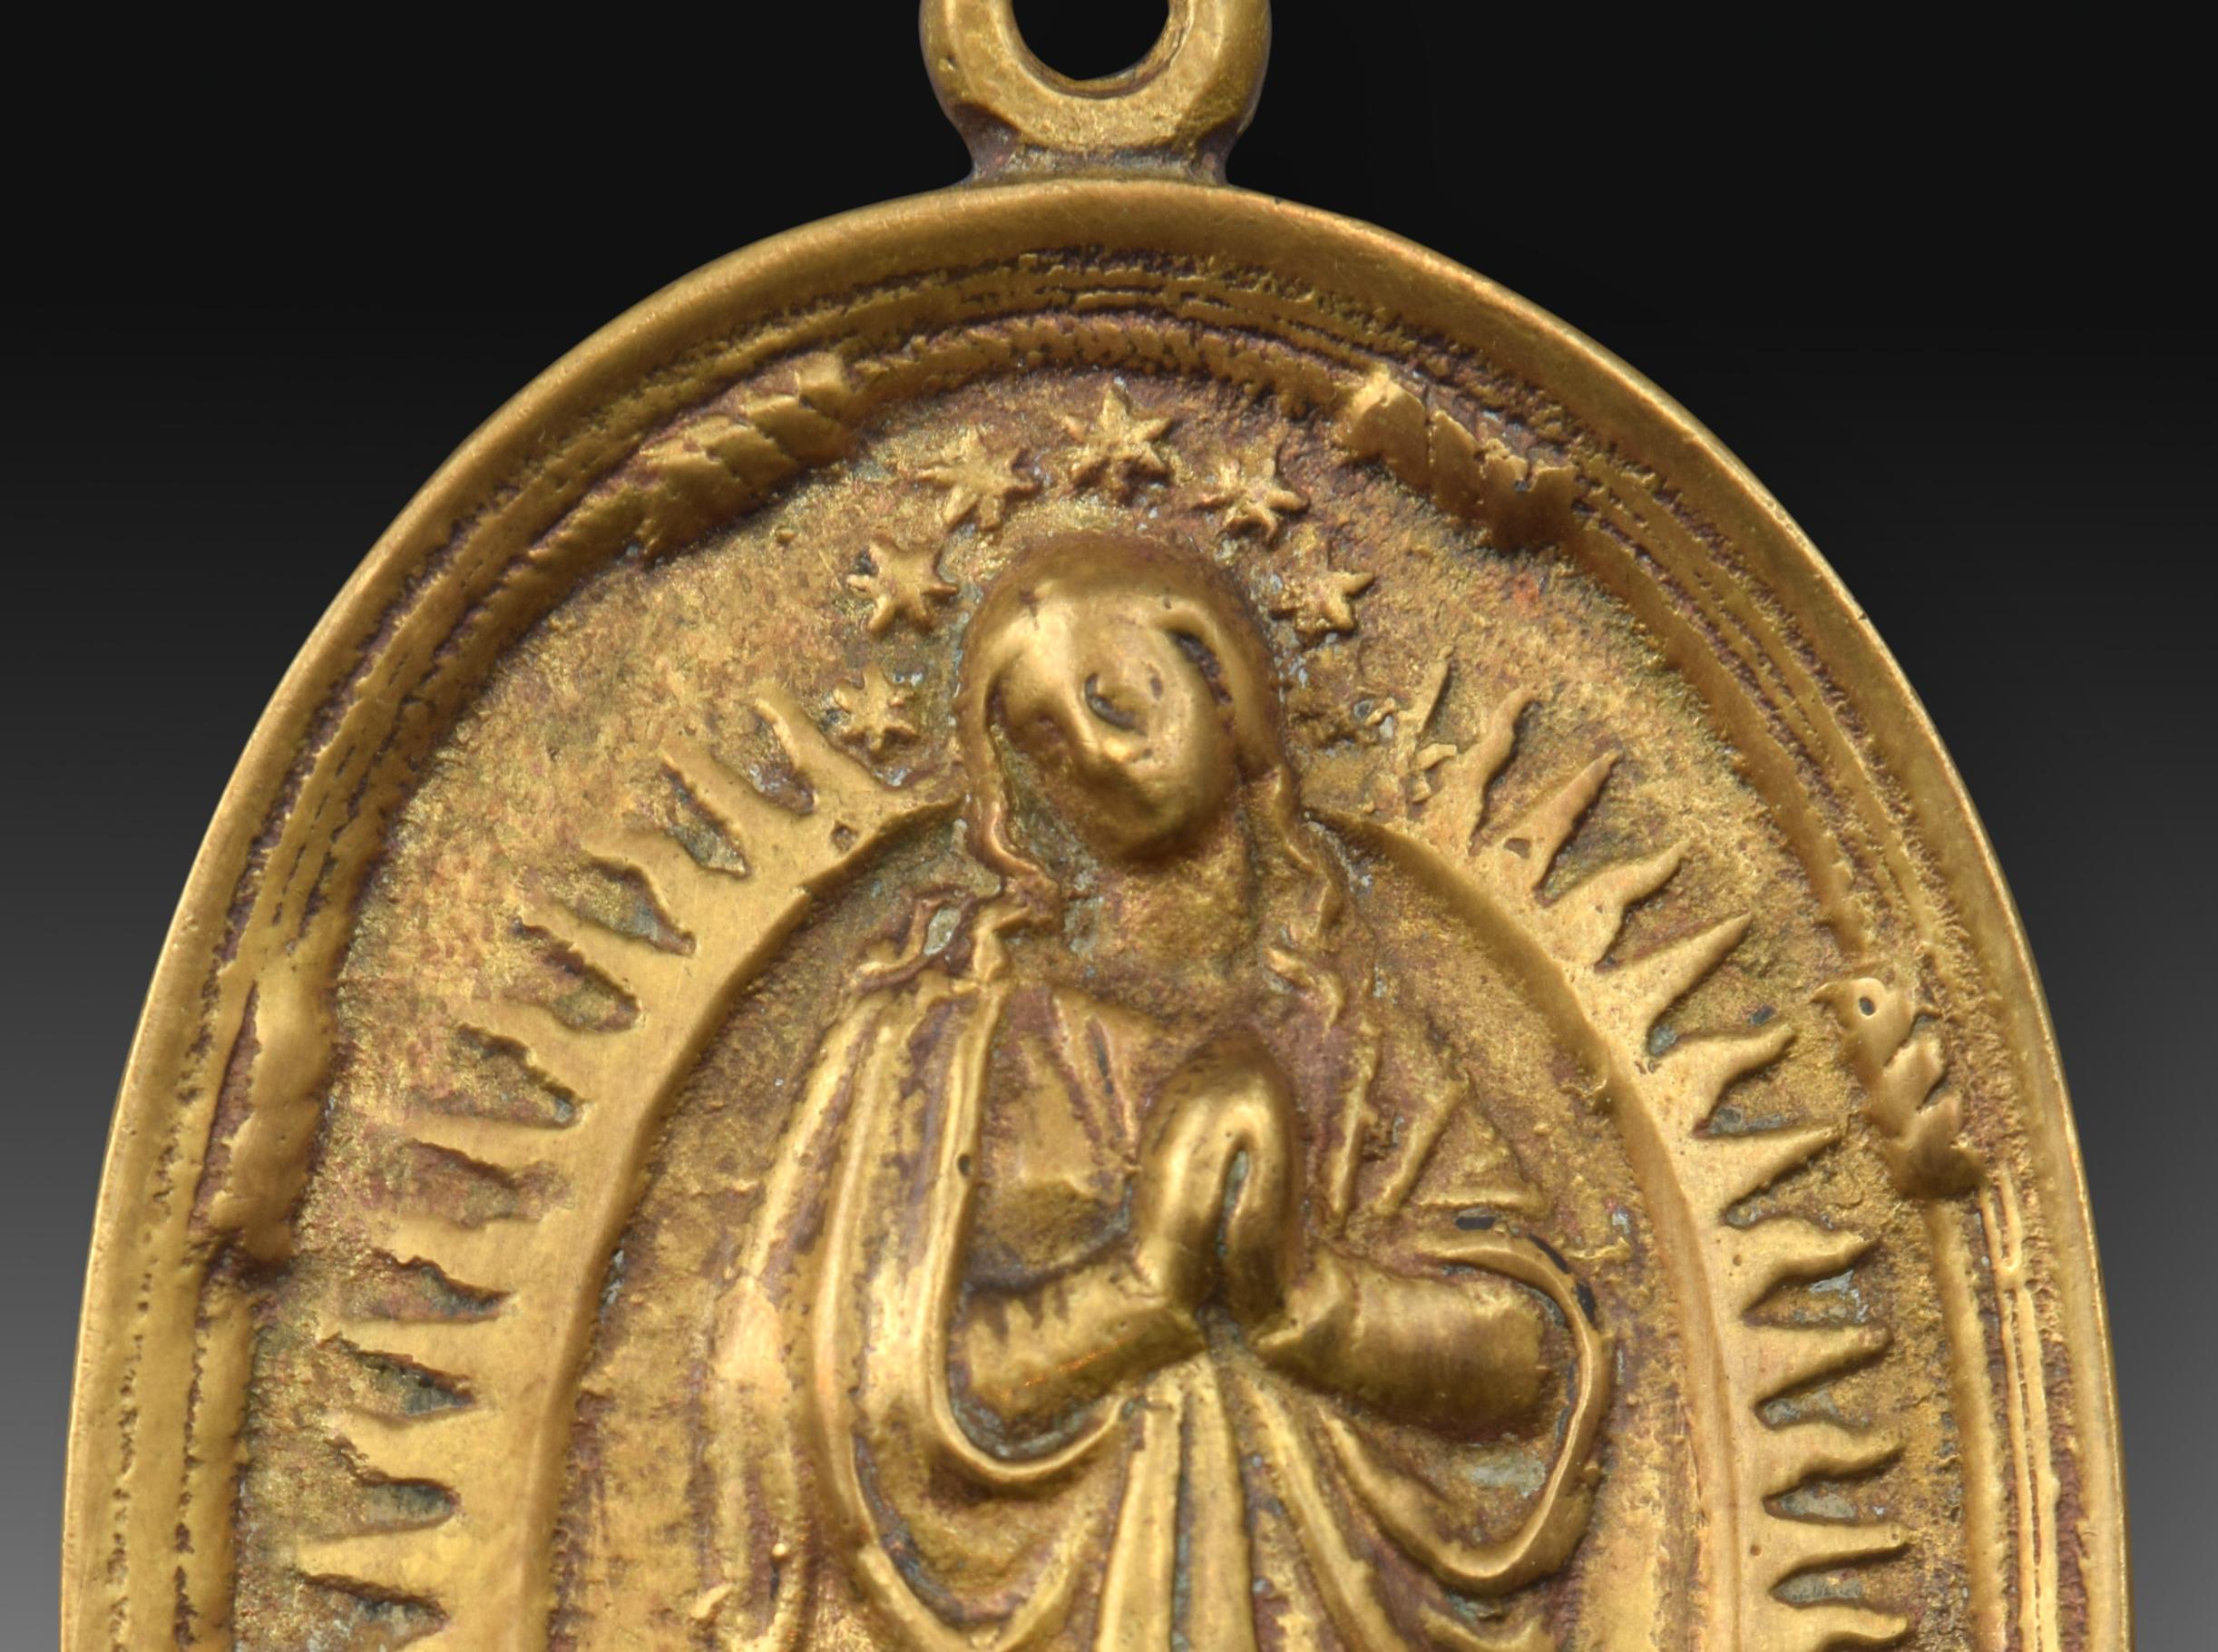 Neoclassical Devotional Plaque, Immaculate Bronze, 19th Century